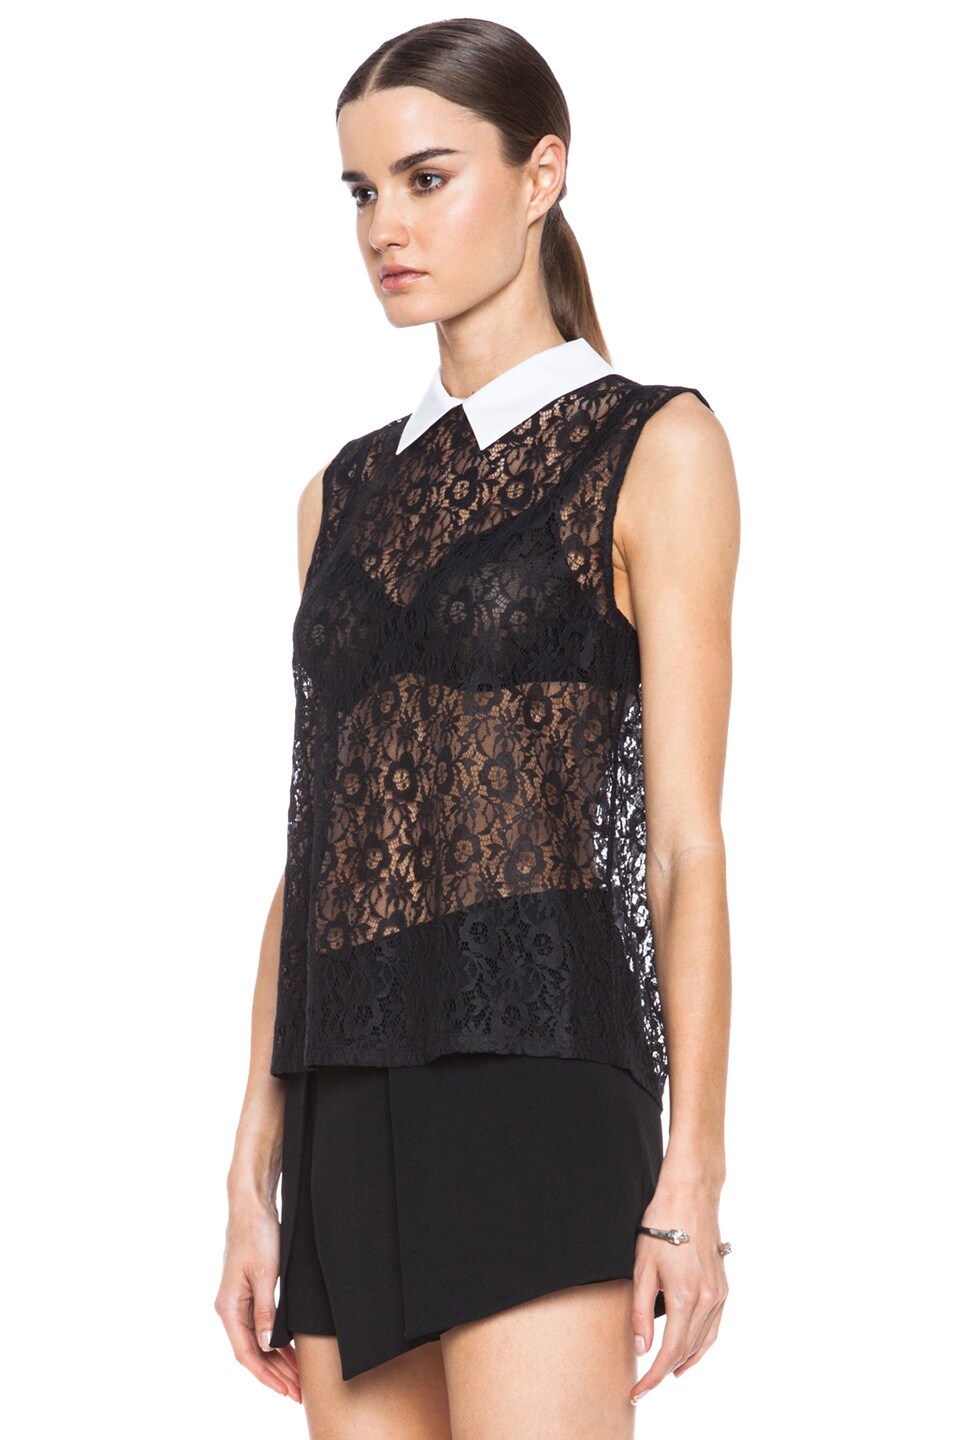 Equipment Elliot Lace Knit Top with Contrast Collar in Black | FWRD